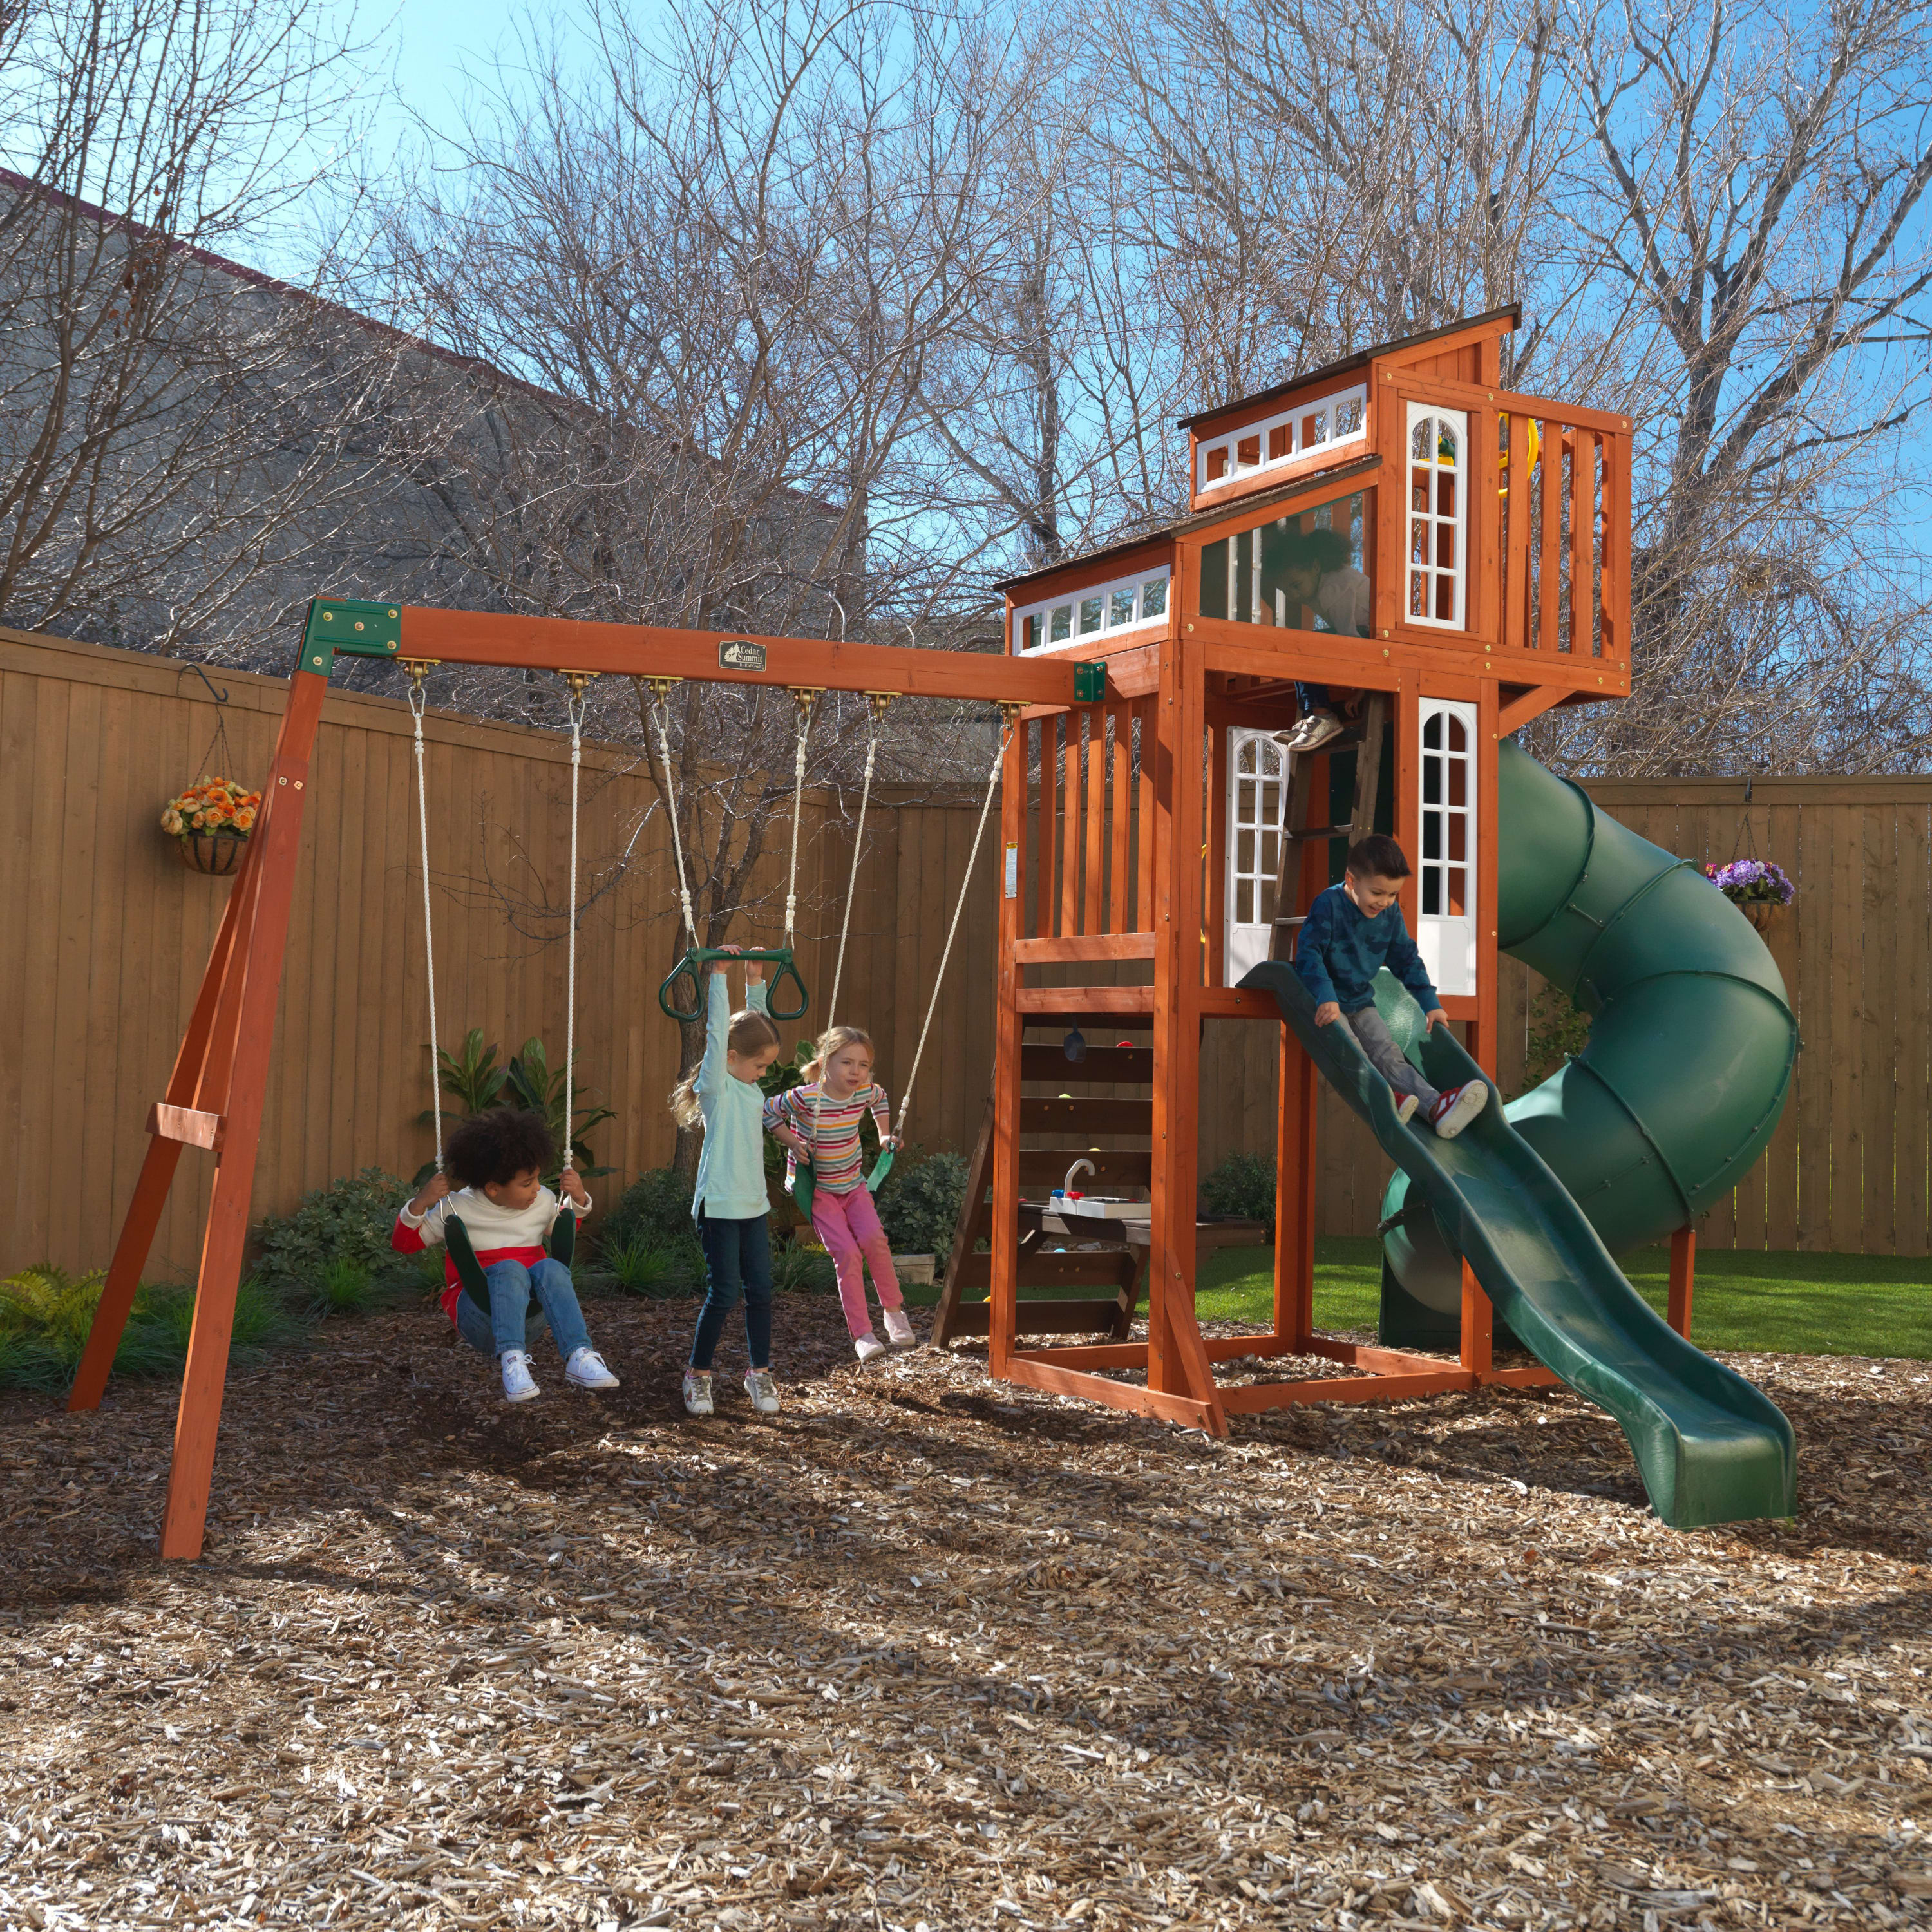 KidKraft Austin Wooden Outdoor Swing Set with Slides, Swings, Kitchen and Rock Wall - image 6 of 27